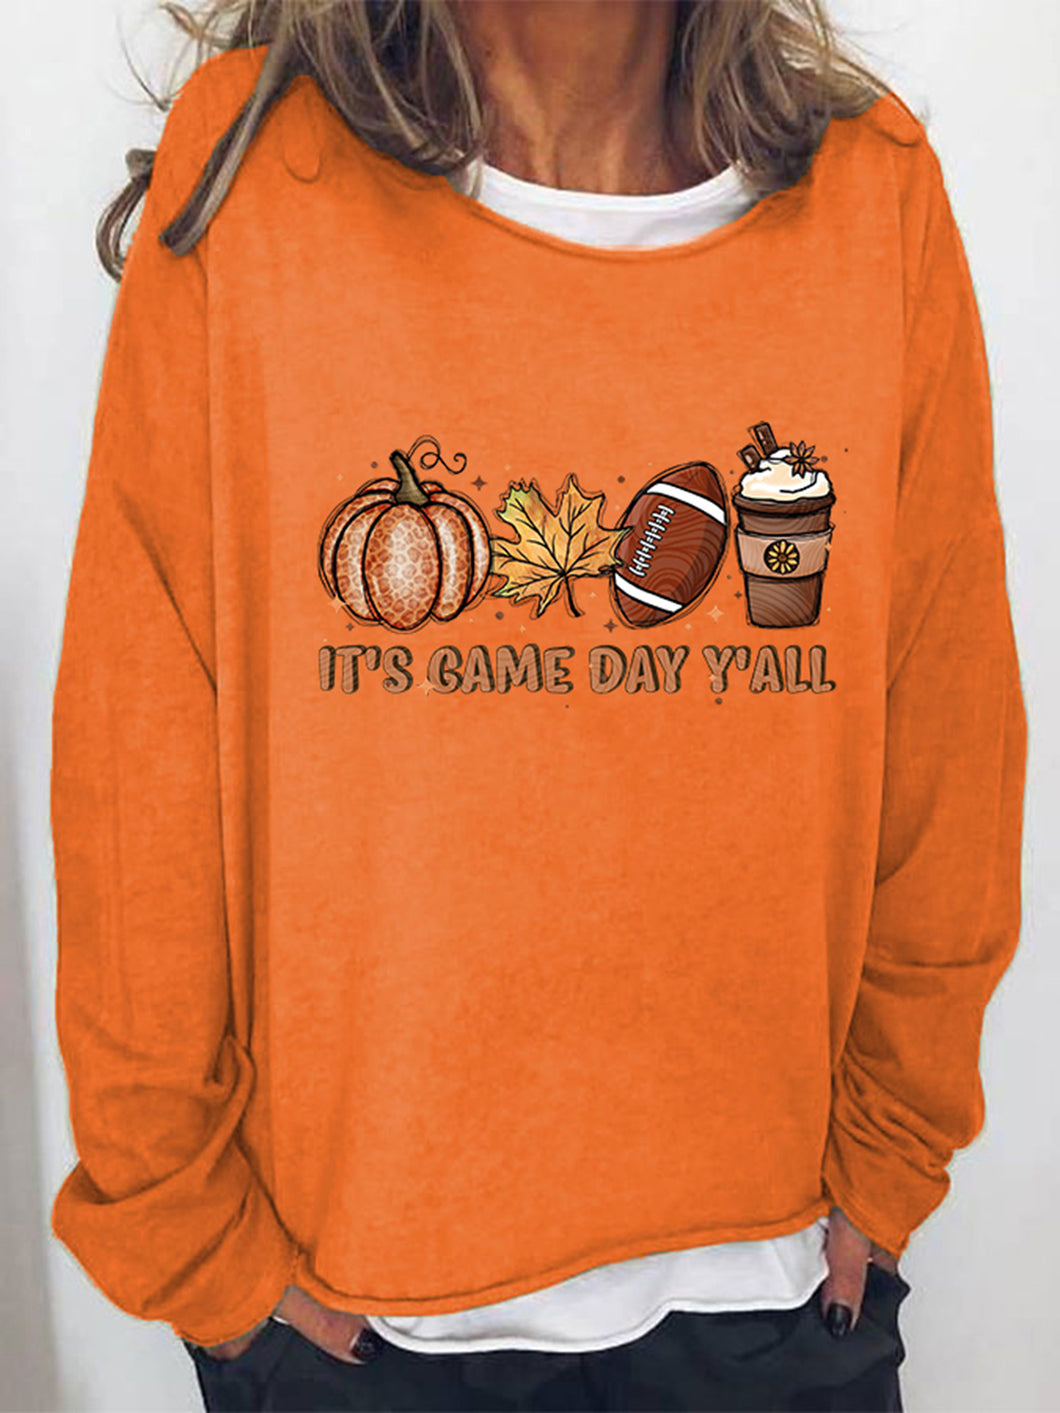 IT'S GAME DAY Y'ALL Graphic Sweatshirt